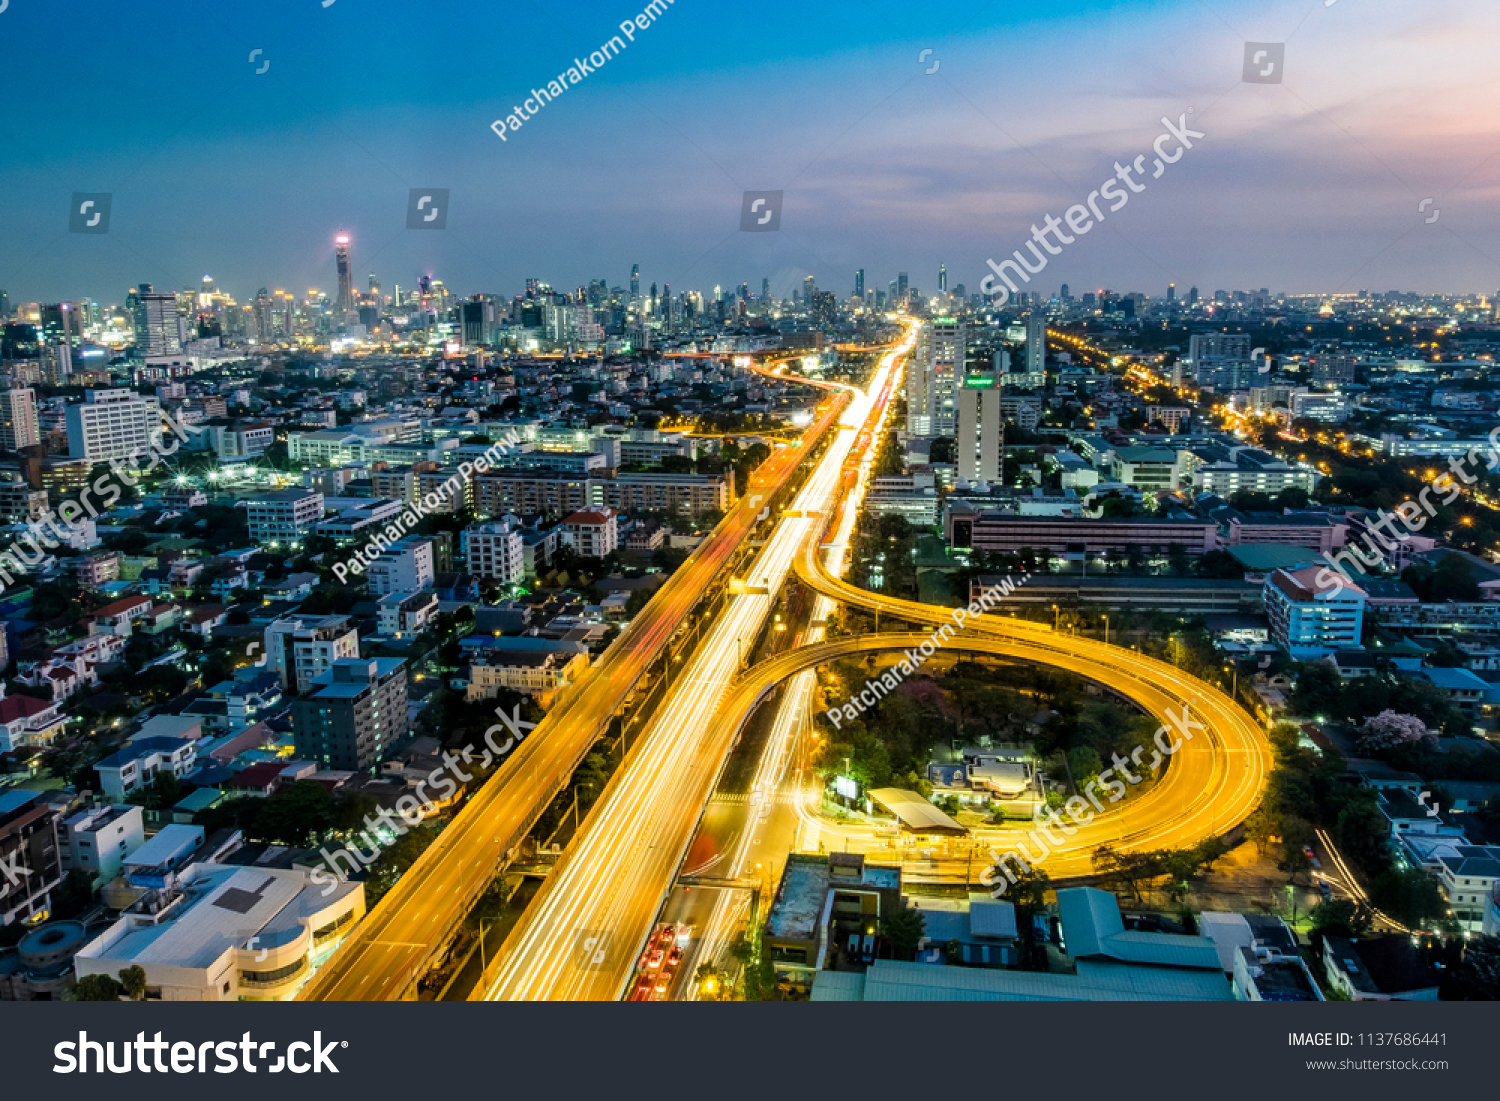 Bangkok/Thailand - 2017 : Night landscape of transportation with pastel sky in Pharam 6 , Bangkok. A lot of car move going on at the night.  #1137686441